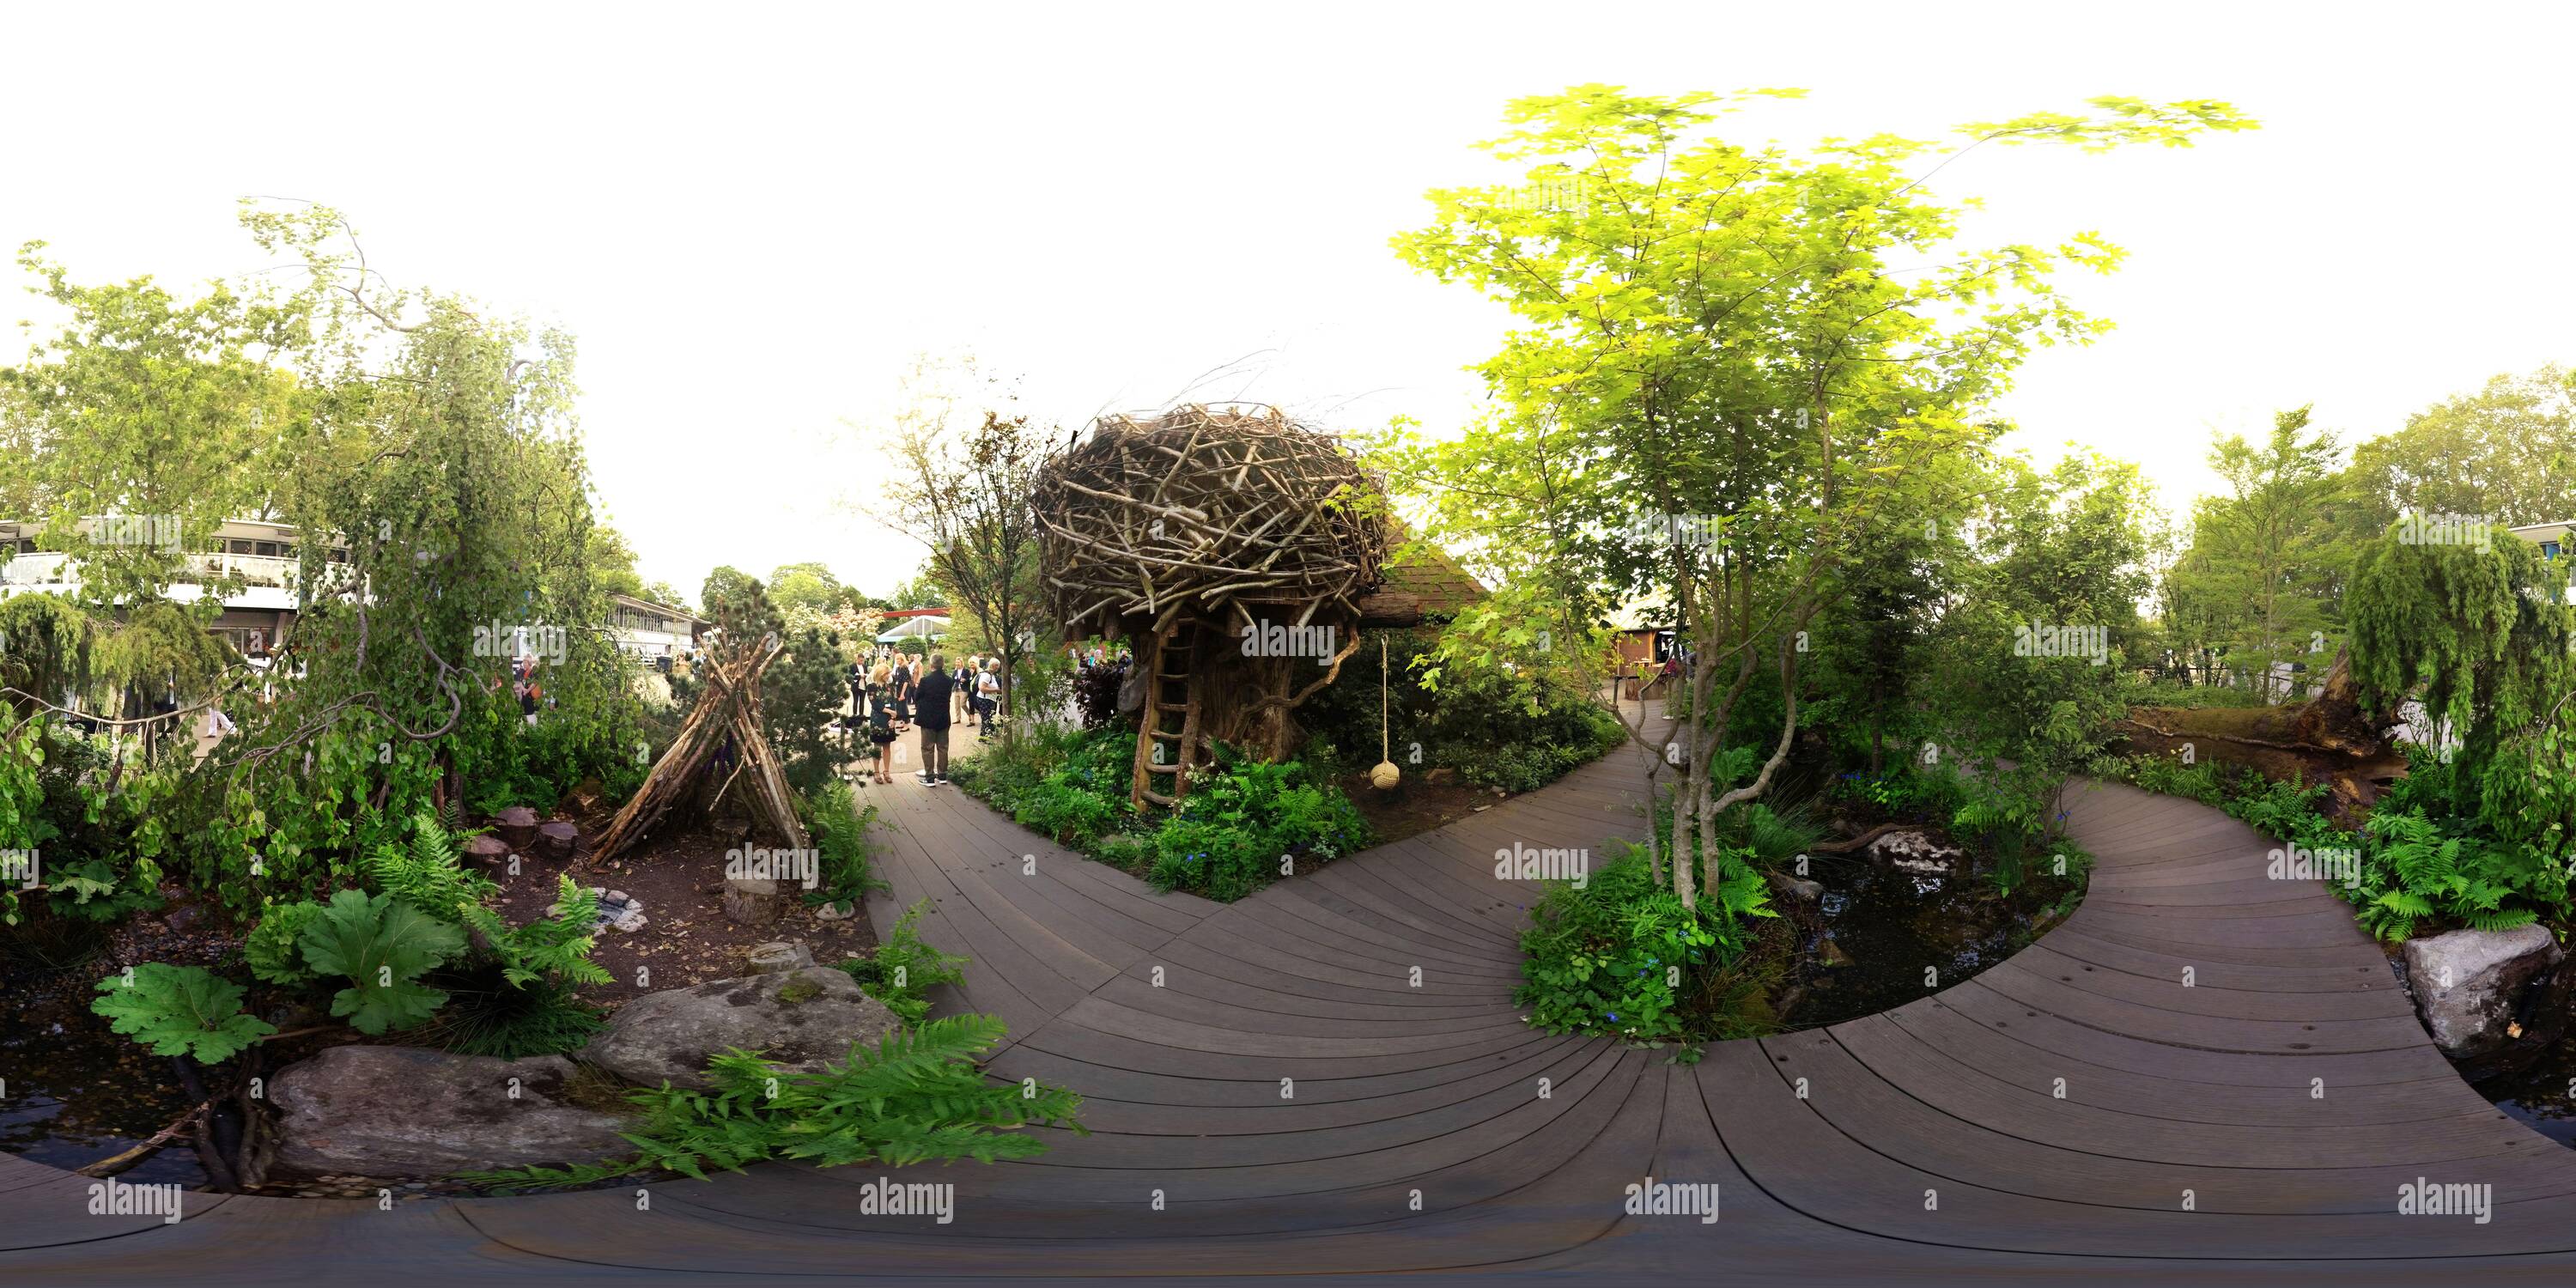 360 degree panoramic view of The RHS Back To Nature Garden at the Chelsea Flower Show 2019. The garden is jointly designed by Kate Duchess Of Cambridge  PICTURE: MARK PAIN / ALAMY